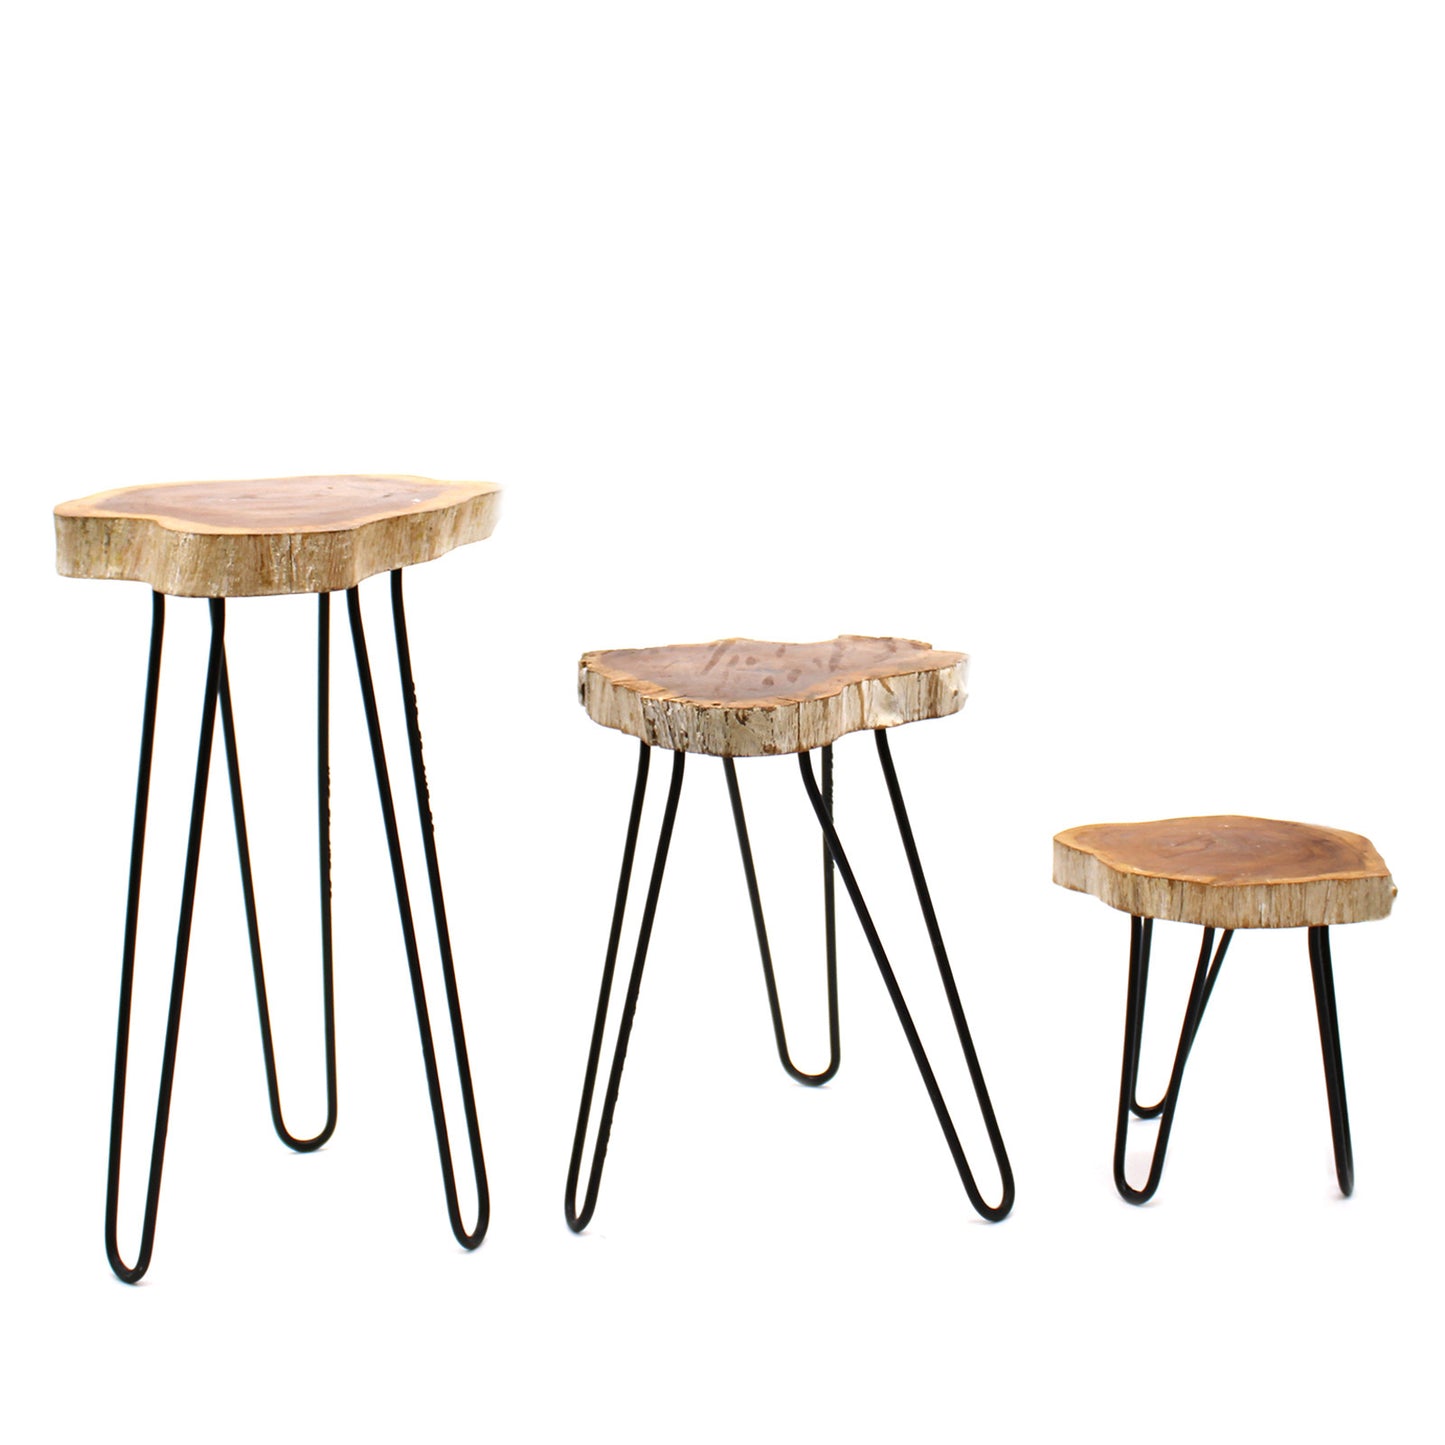 Set of 3 Gamal Wooden Plant Stands